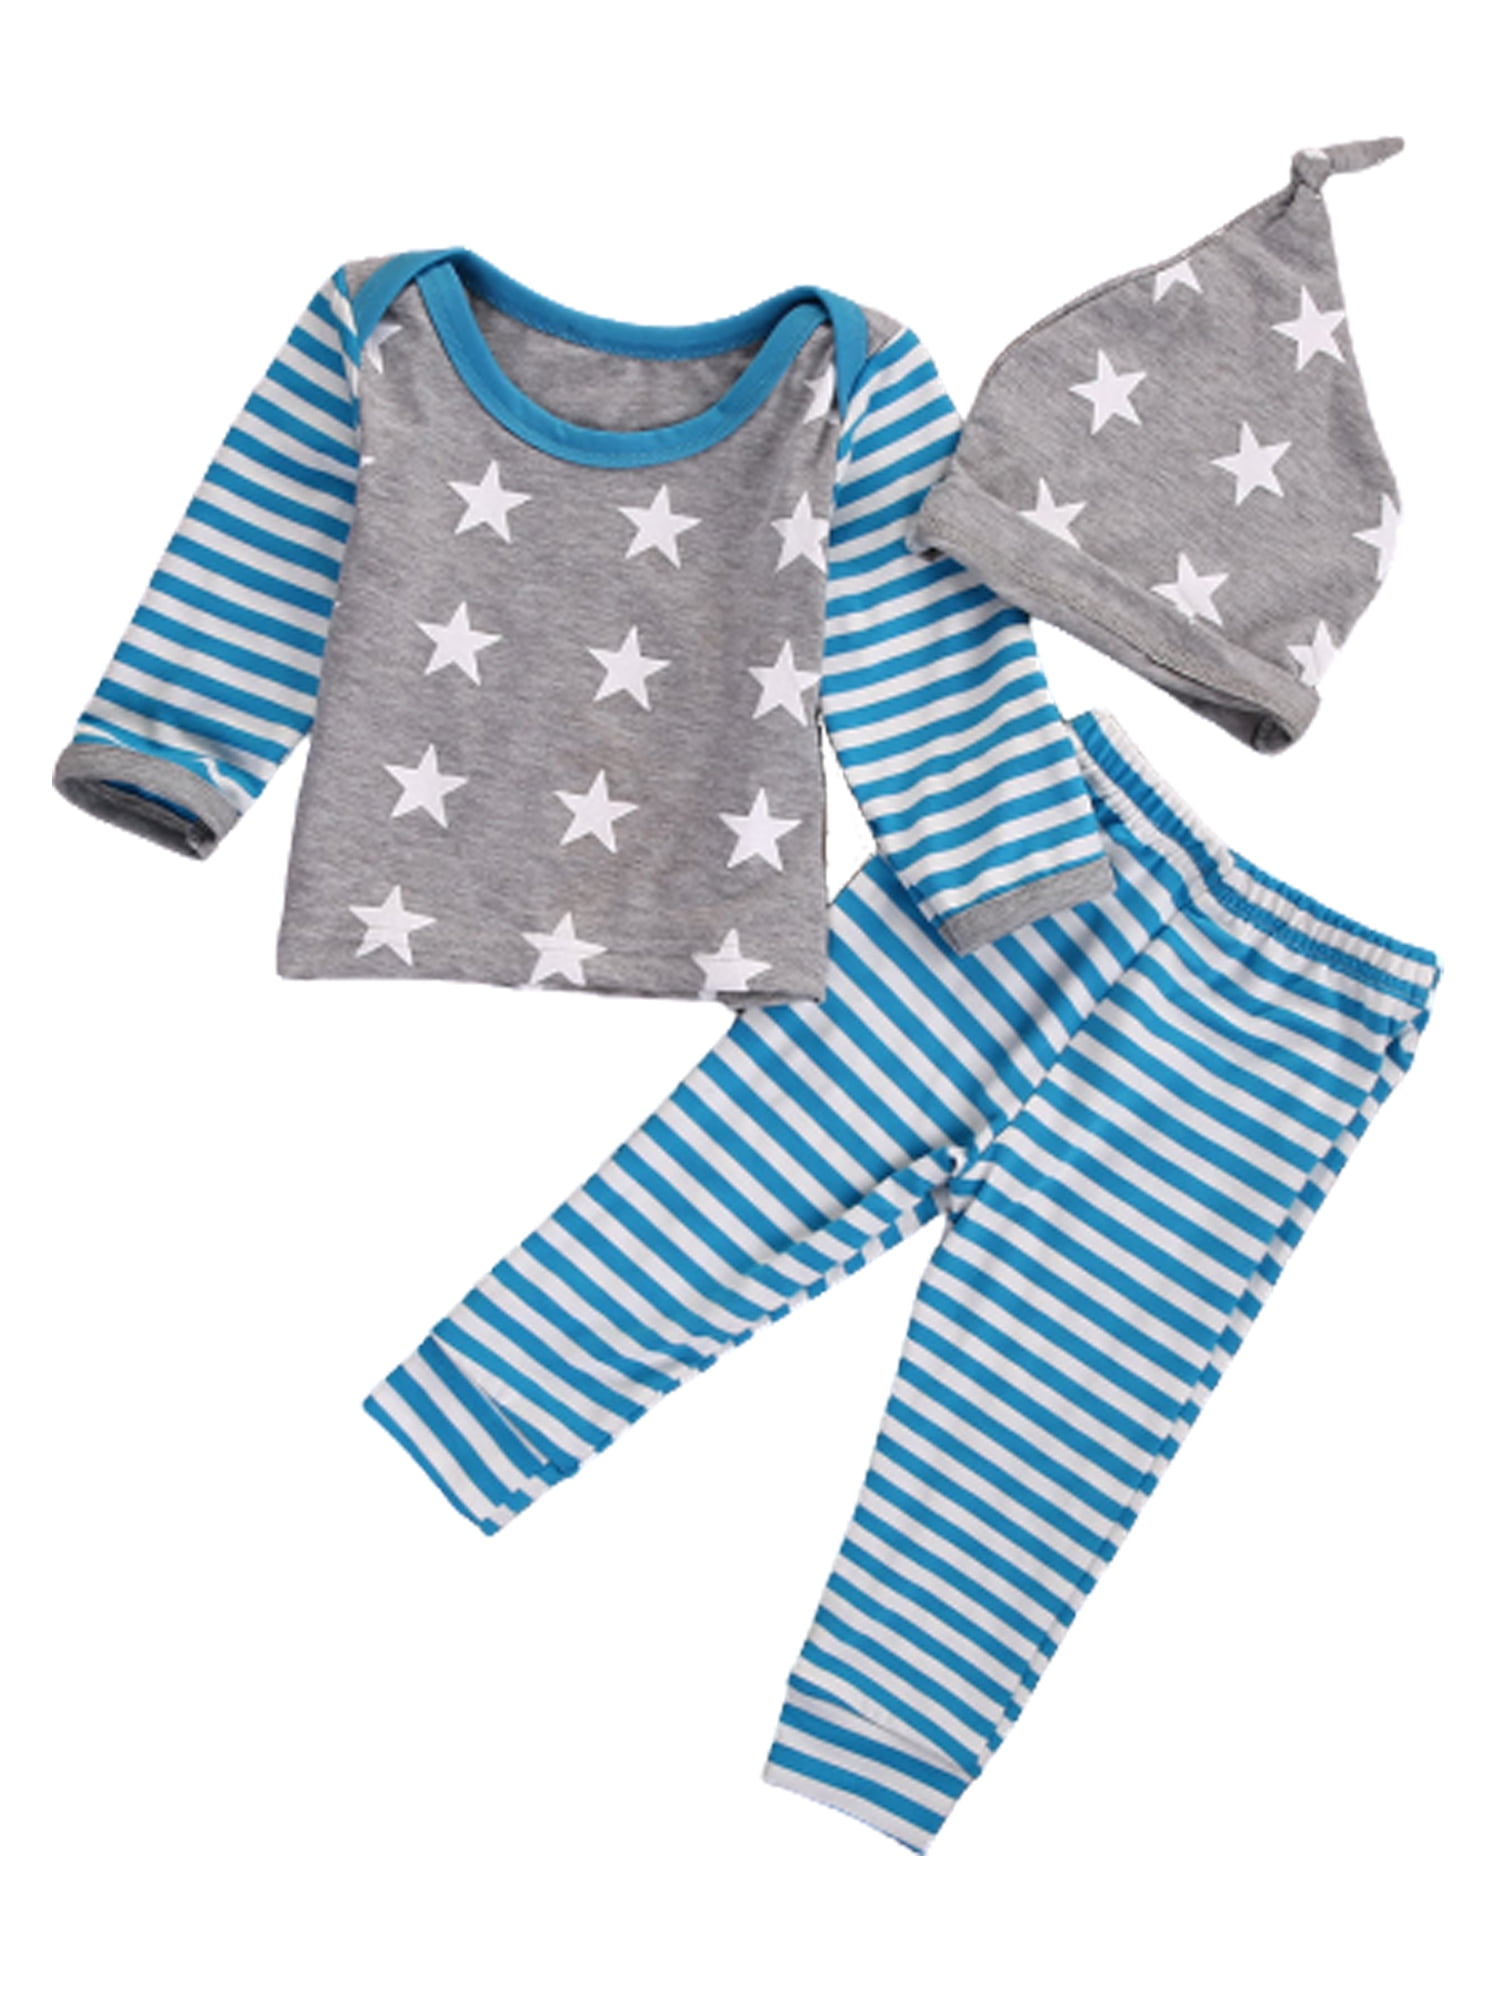 Canis - Canis Newborn Baby Girl Boy Clothes Long Sleeve Striped Tops ...